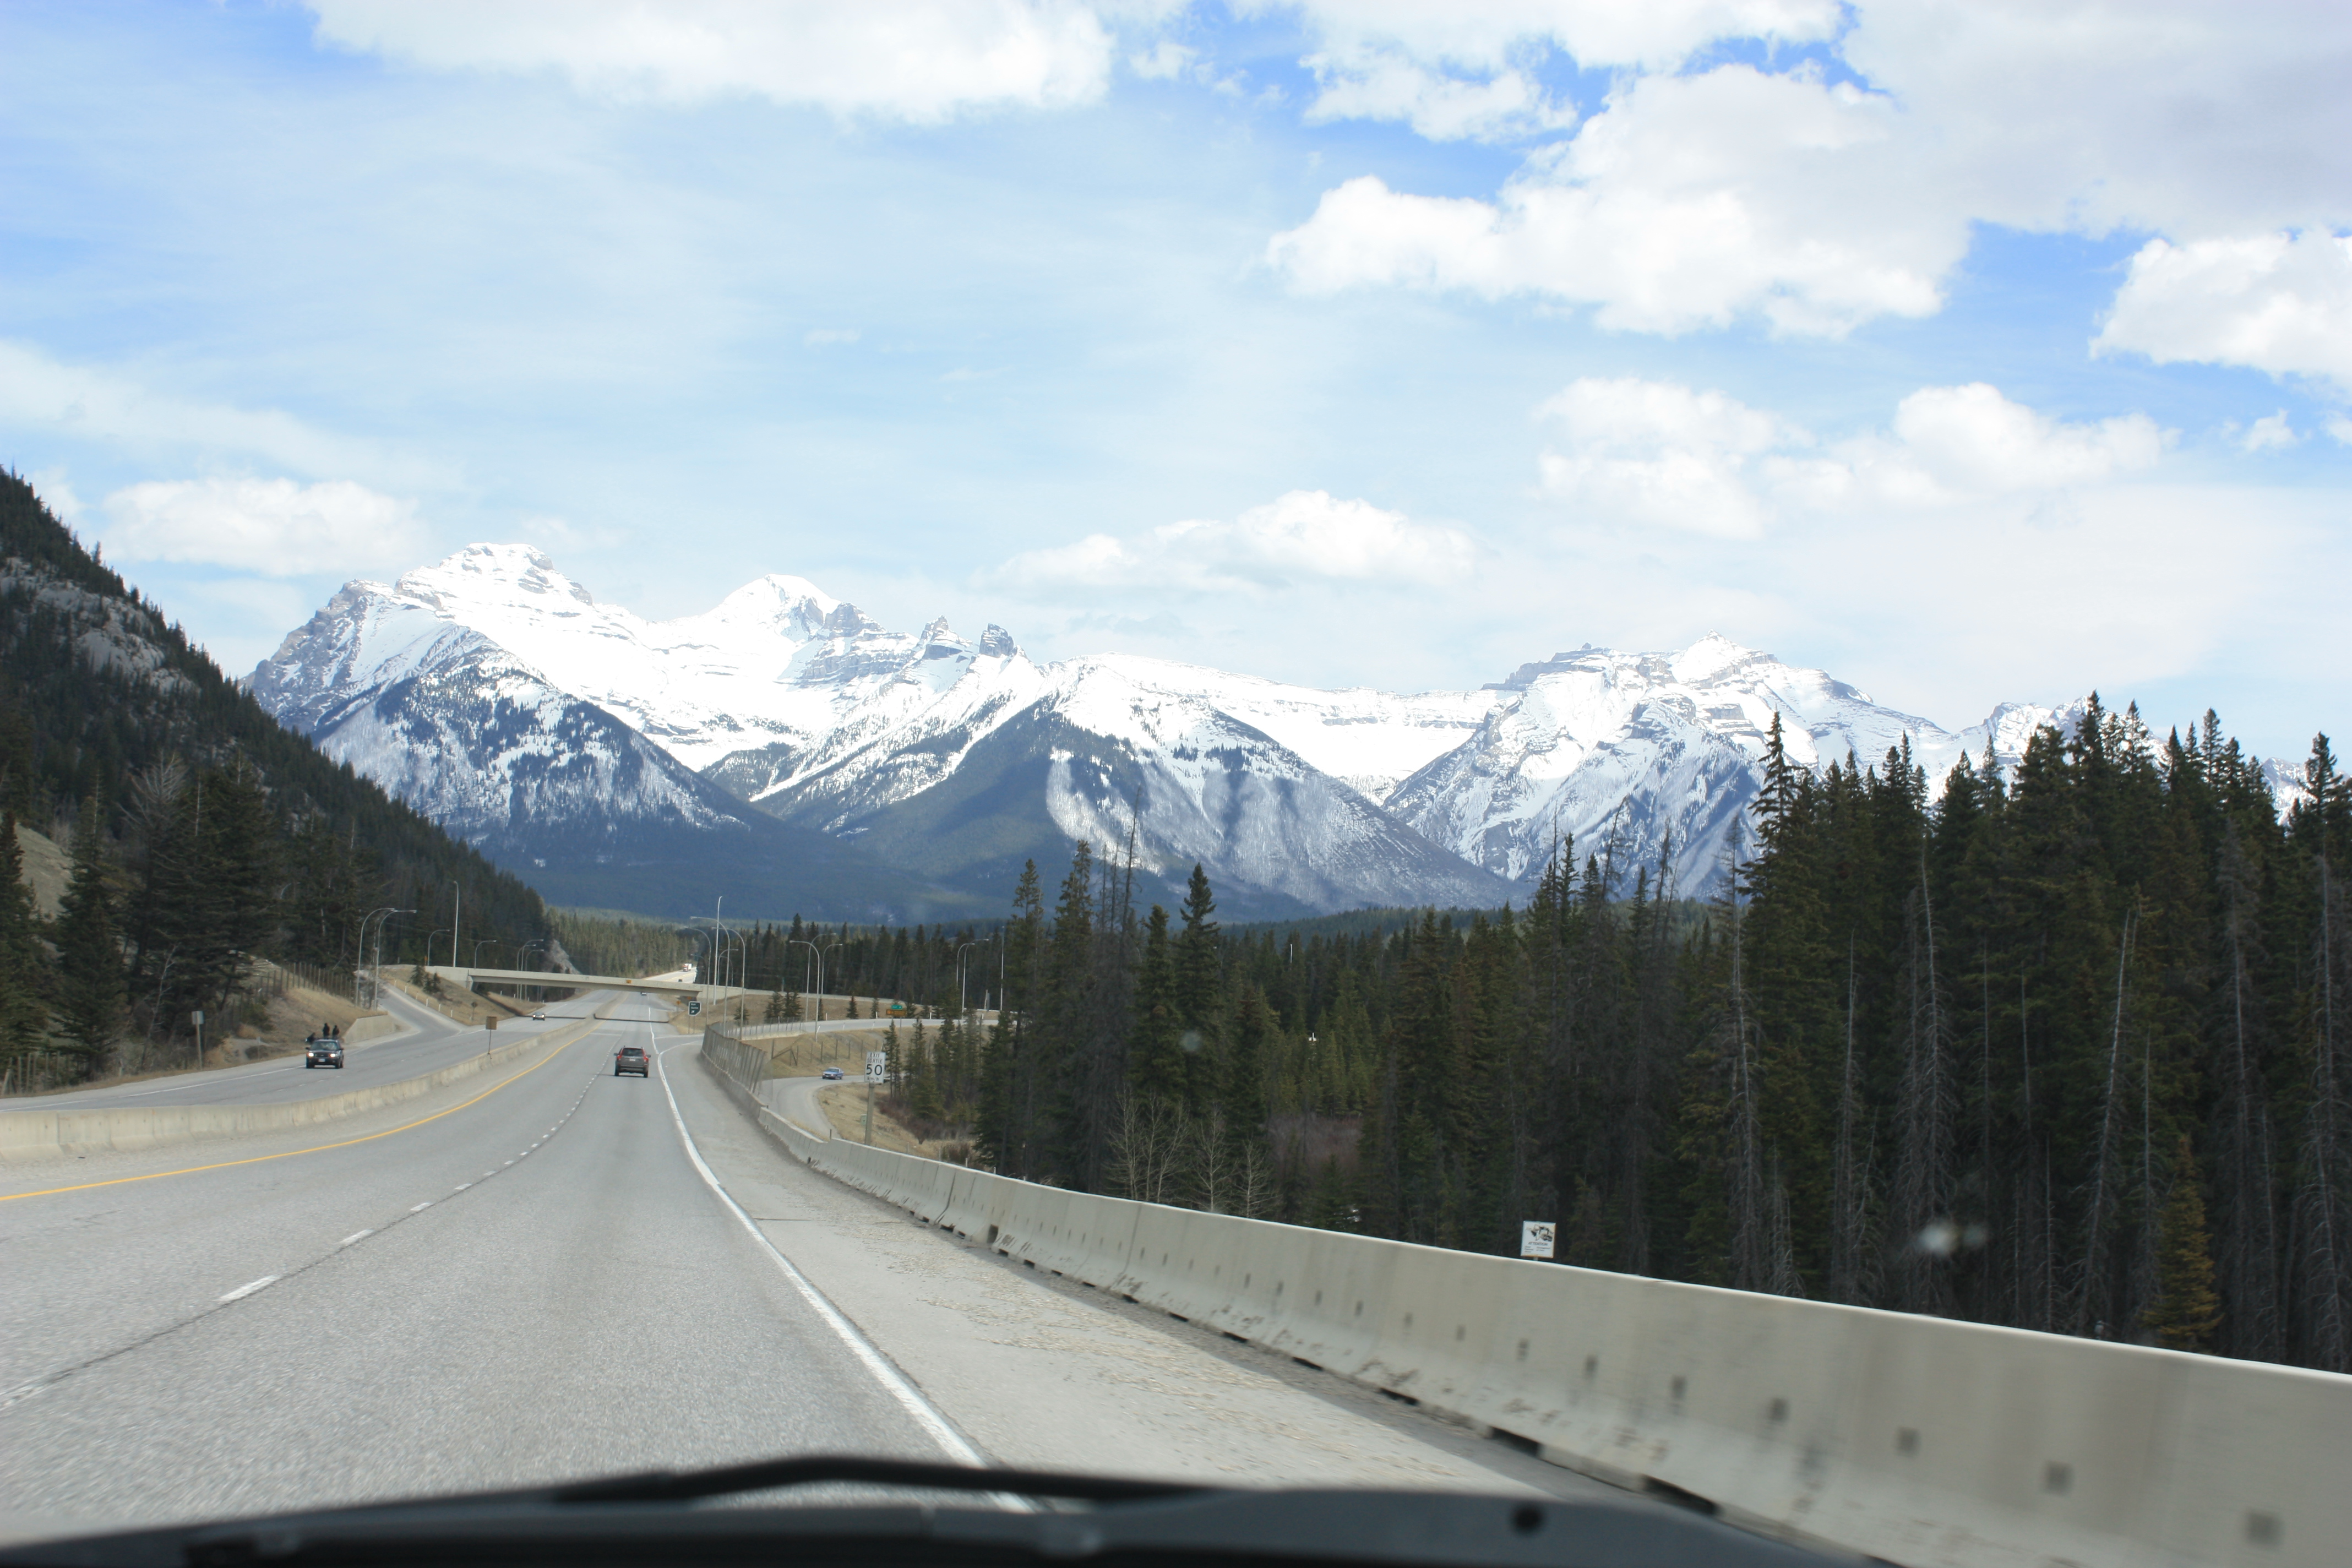 Photos to inspire you to visit Alberta, Canada